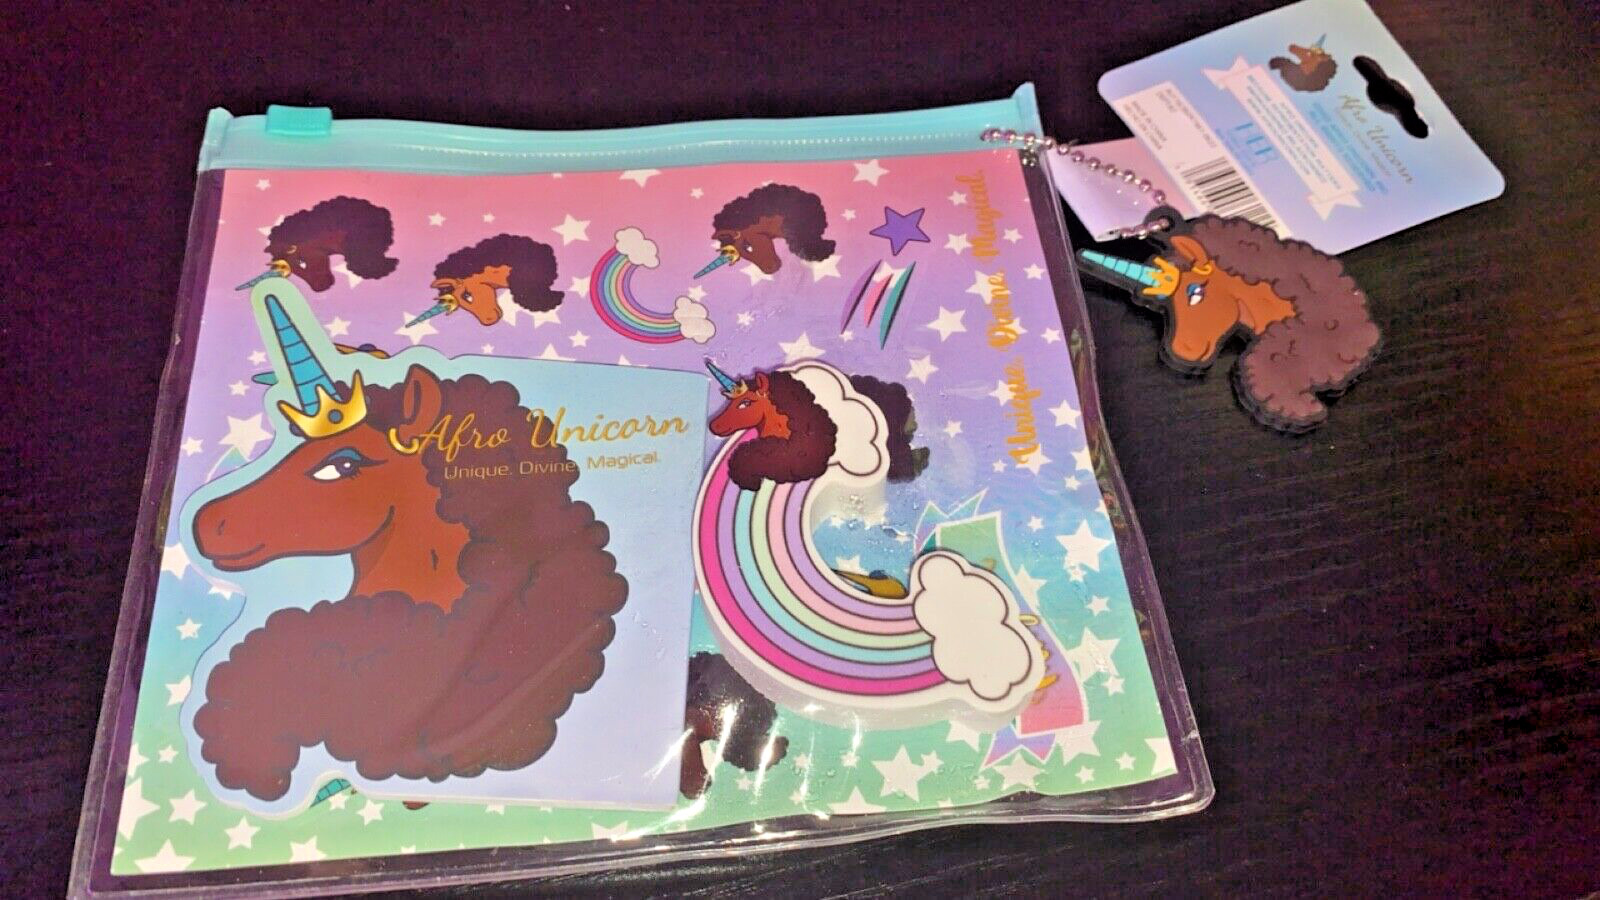 Adorable Afro Unicorn Stationary Set (Notebook,Eraser,Stickers, & Carrying Case)